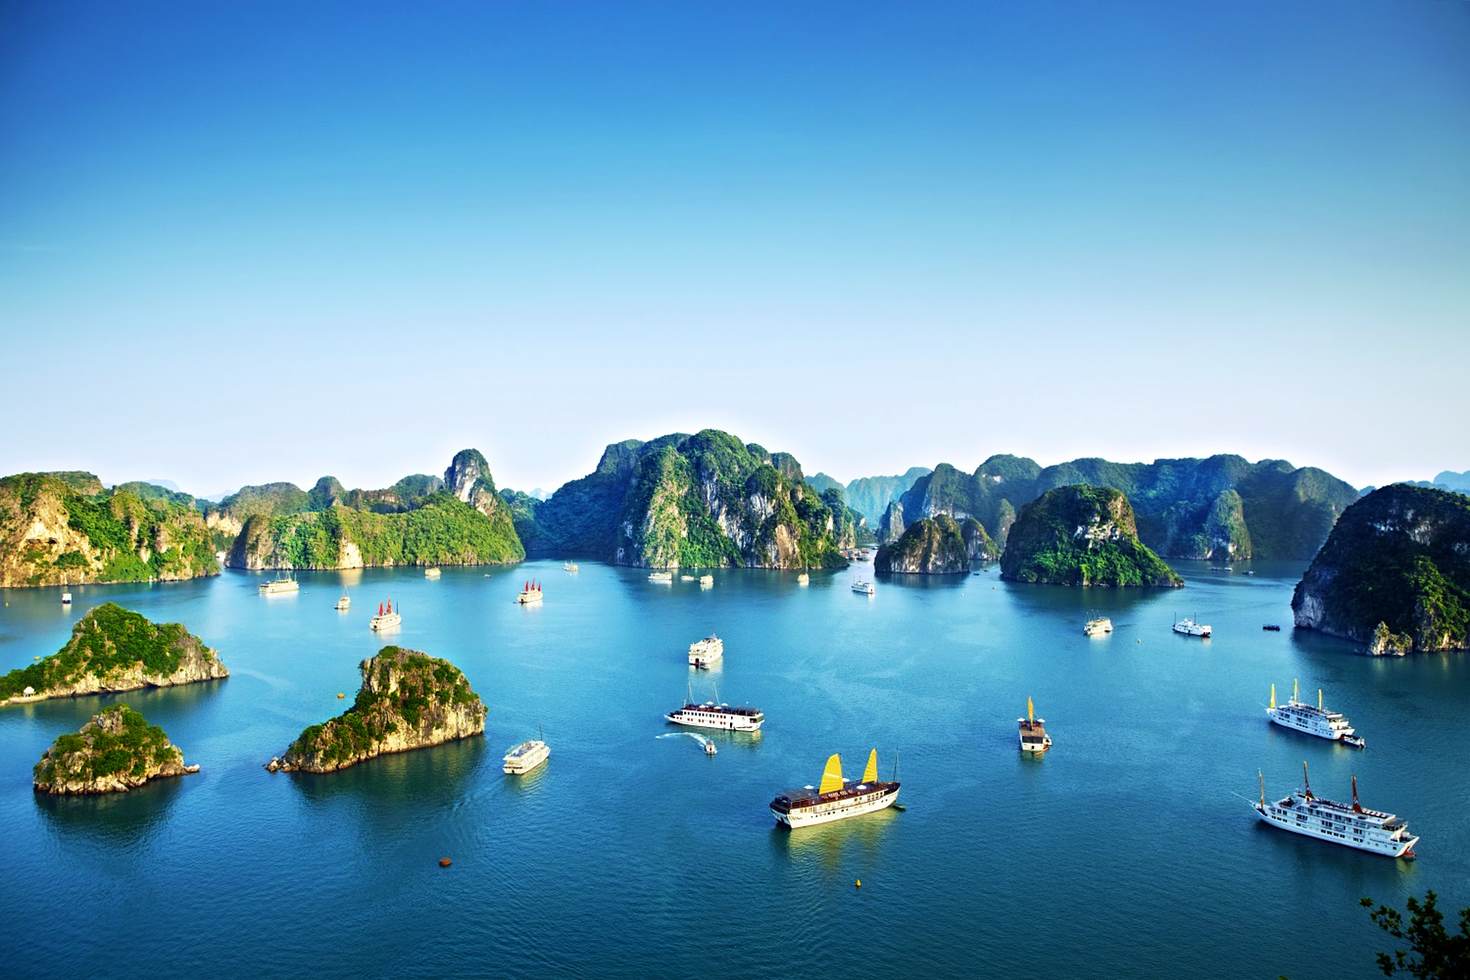 Should you buy Halong Bay Tickets from Tuan Chau Harbour?